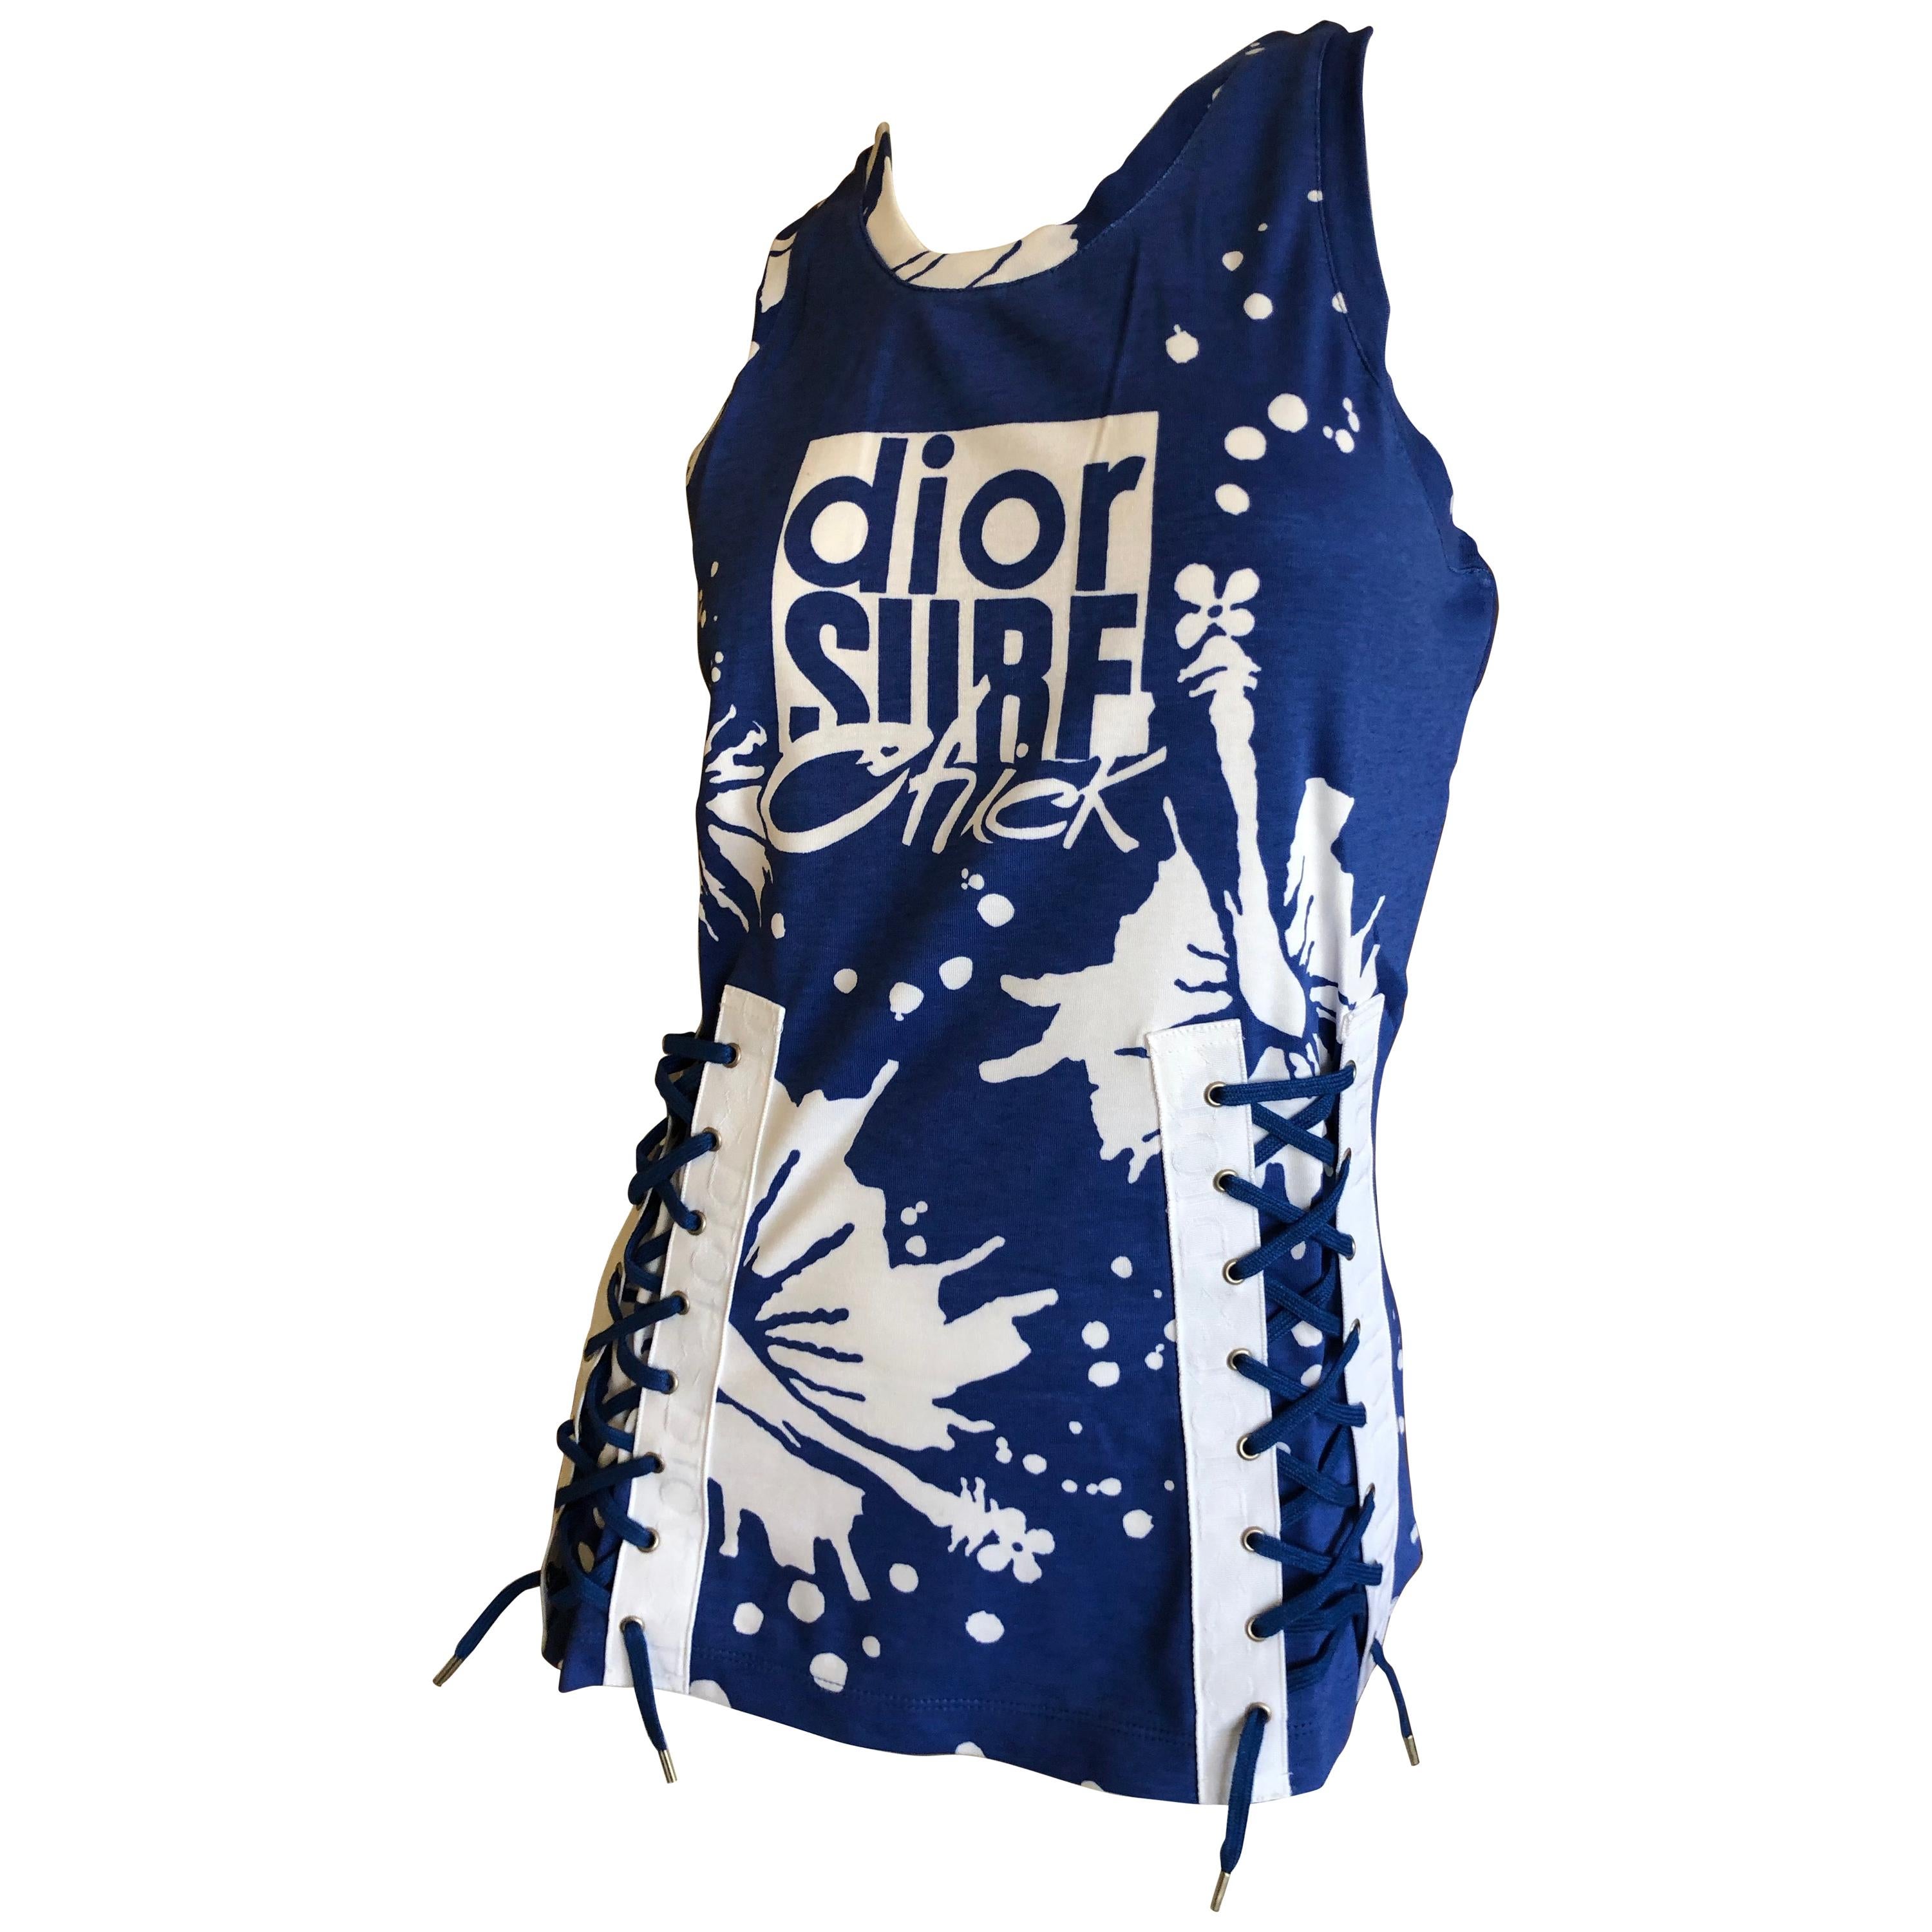 Christian Dior by John Galliano Corset Lace "Dior Surf Chick" Sleeveless Top New